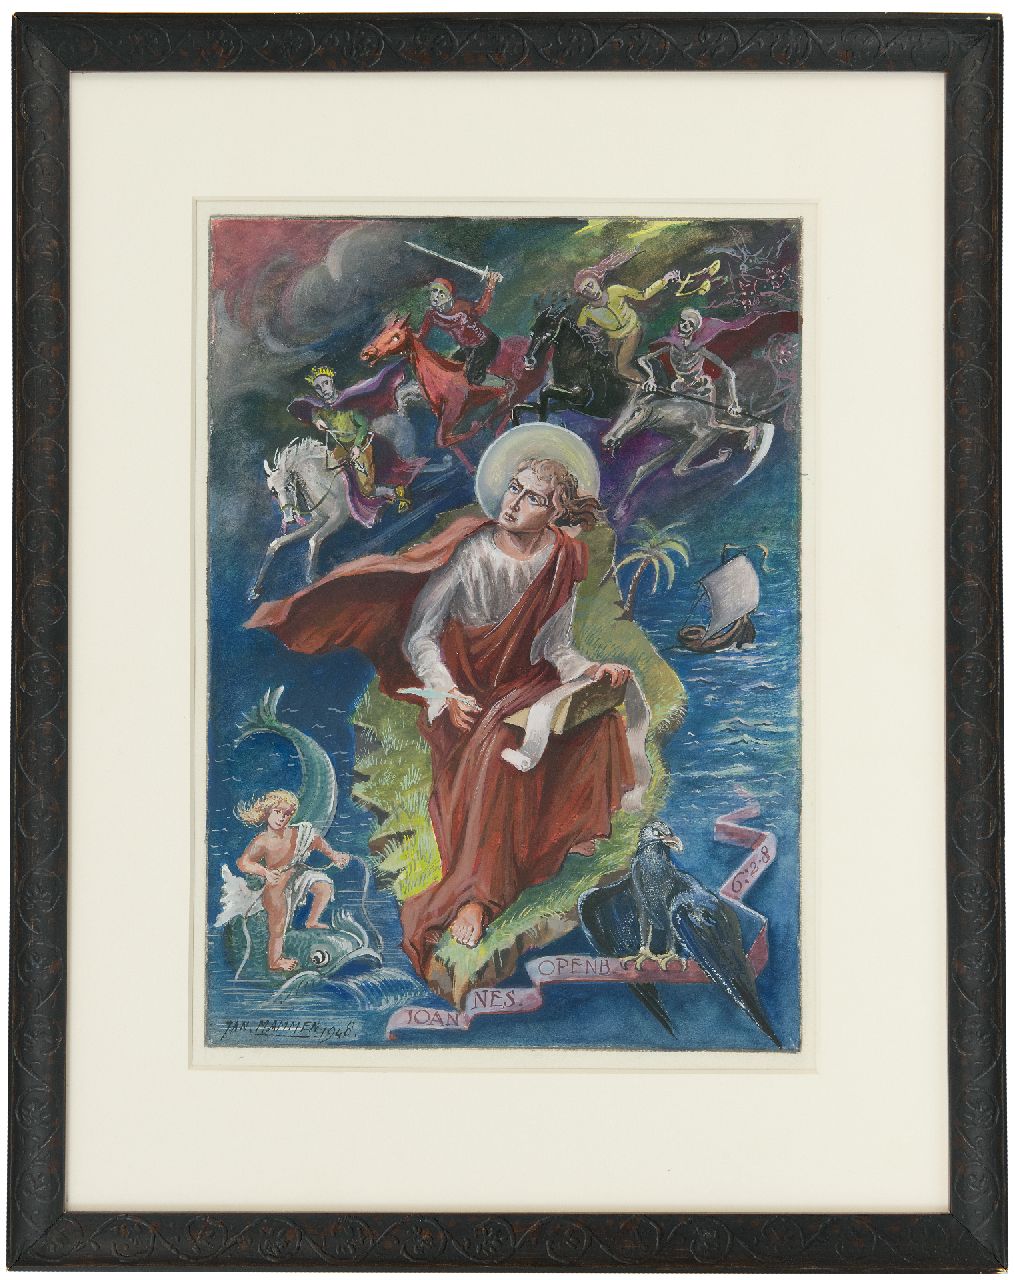 Mammen J.  | Jan Mammen | Watercolours and drawings offered for sale | John the Baptist on Patmos, watercolour and gouache on paper 27.8 x 20.0 cm, signed l.l. and dated 1948